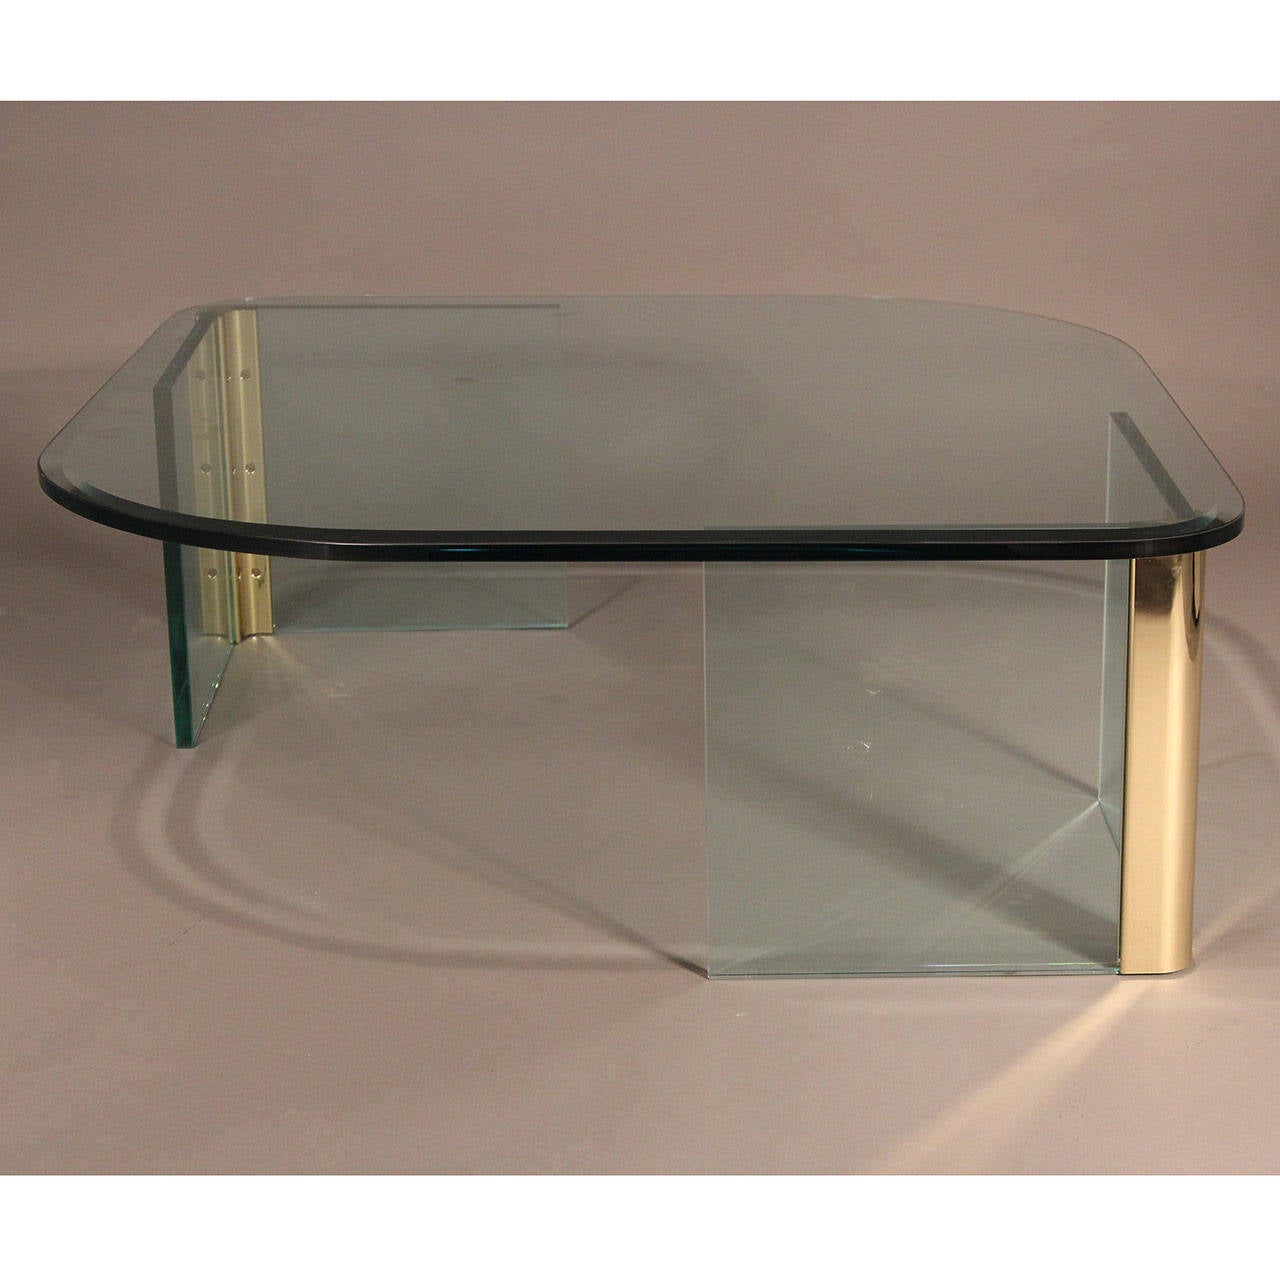 Asymmetrical 3/4 inch heavy glass top table over brass and glass supports.